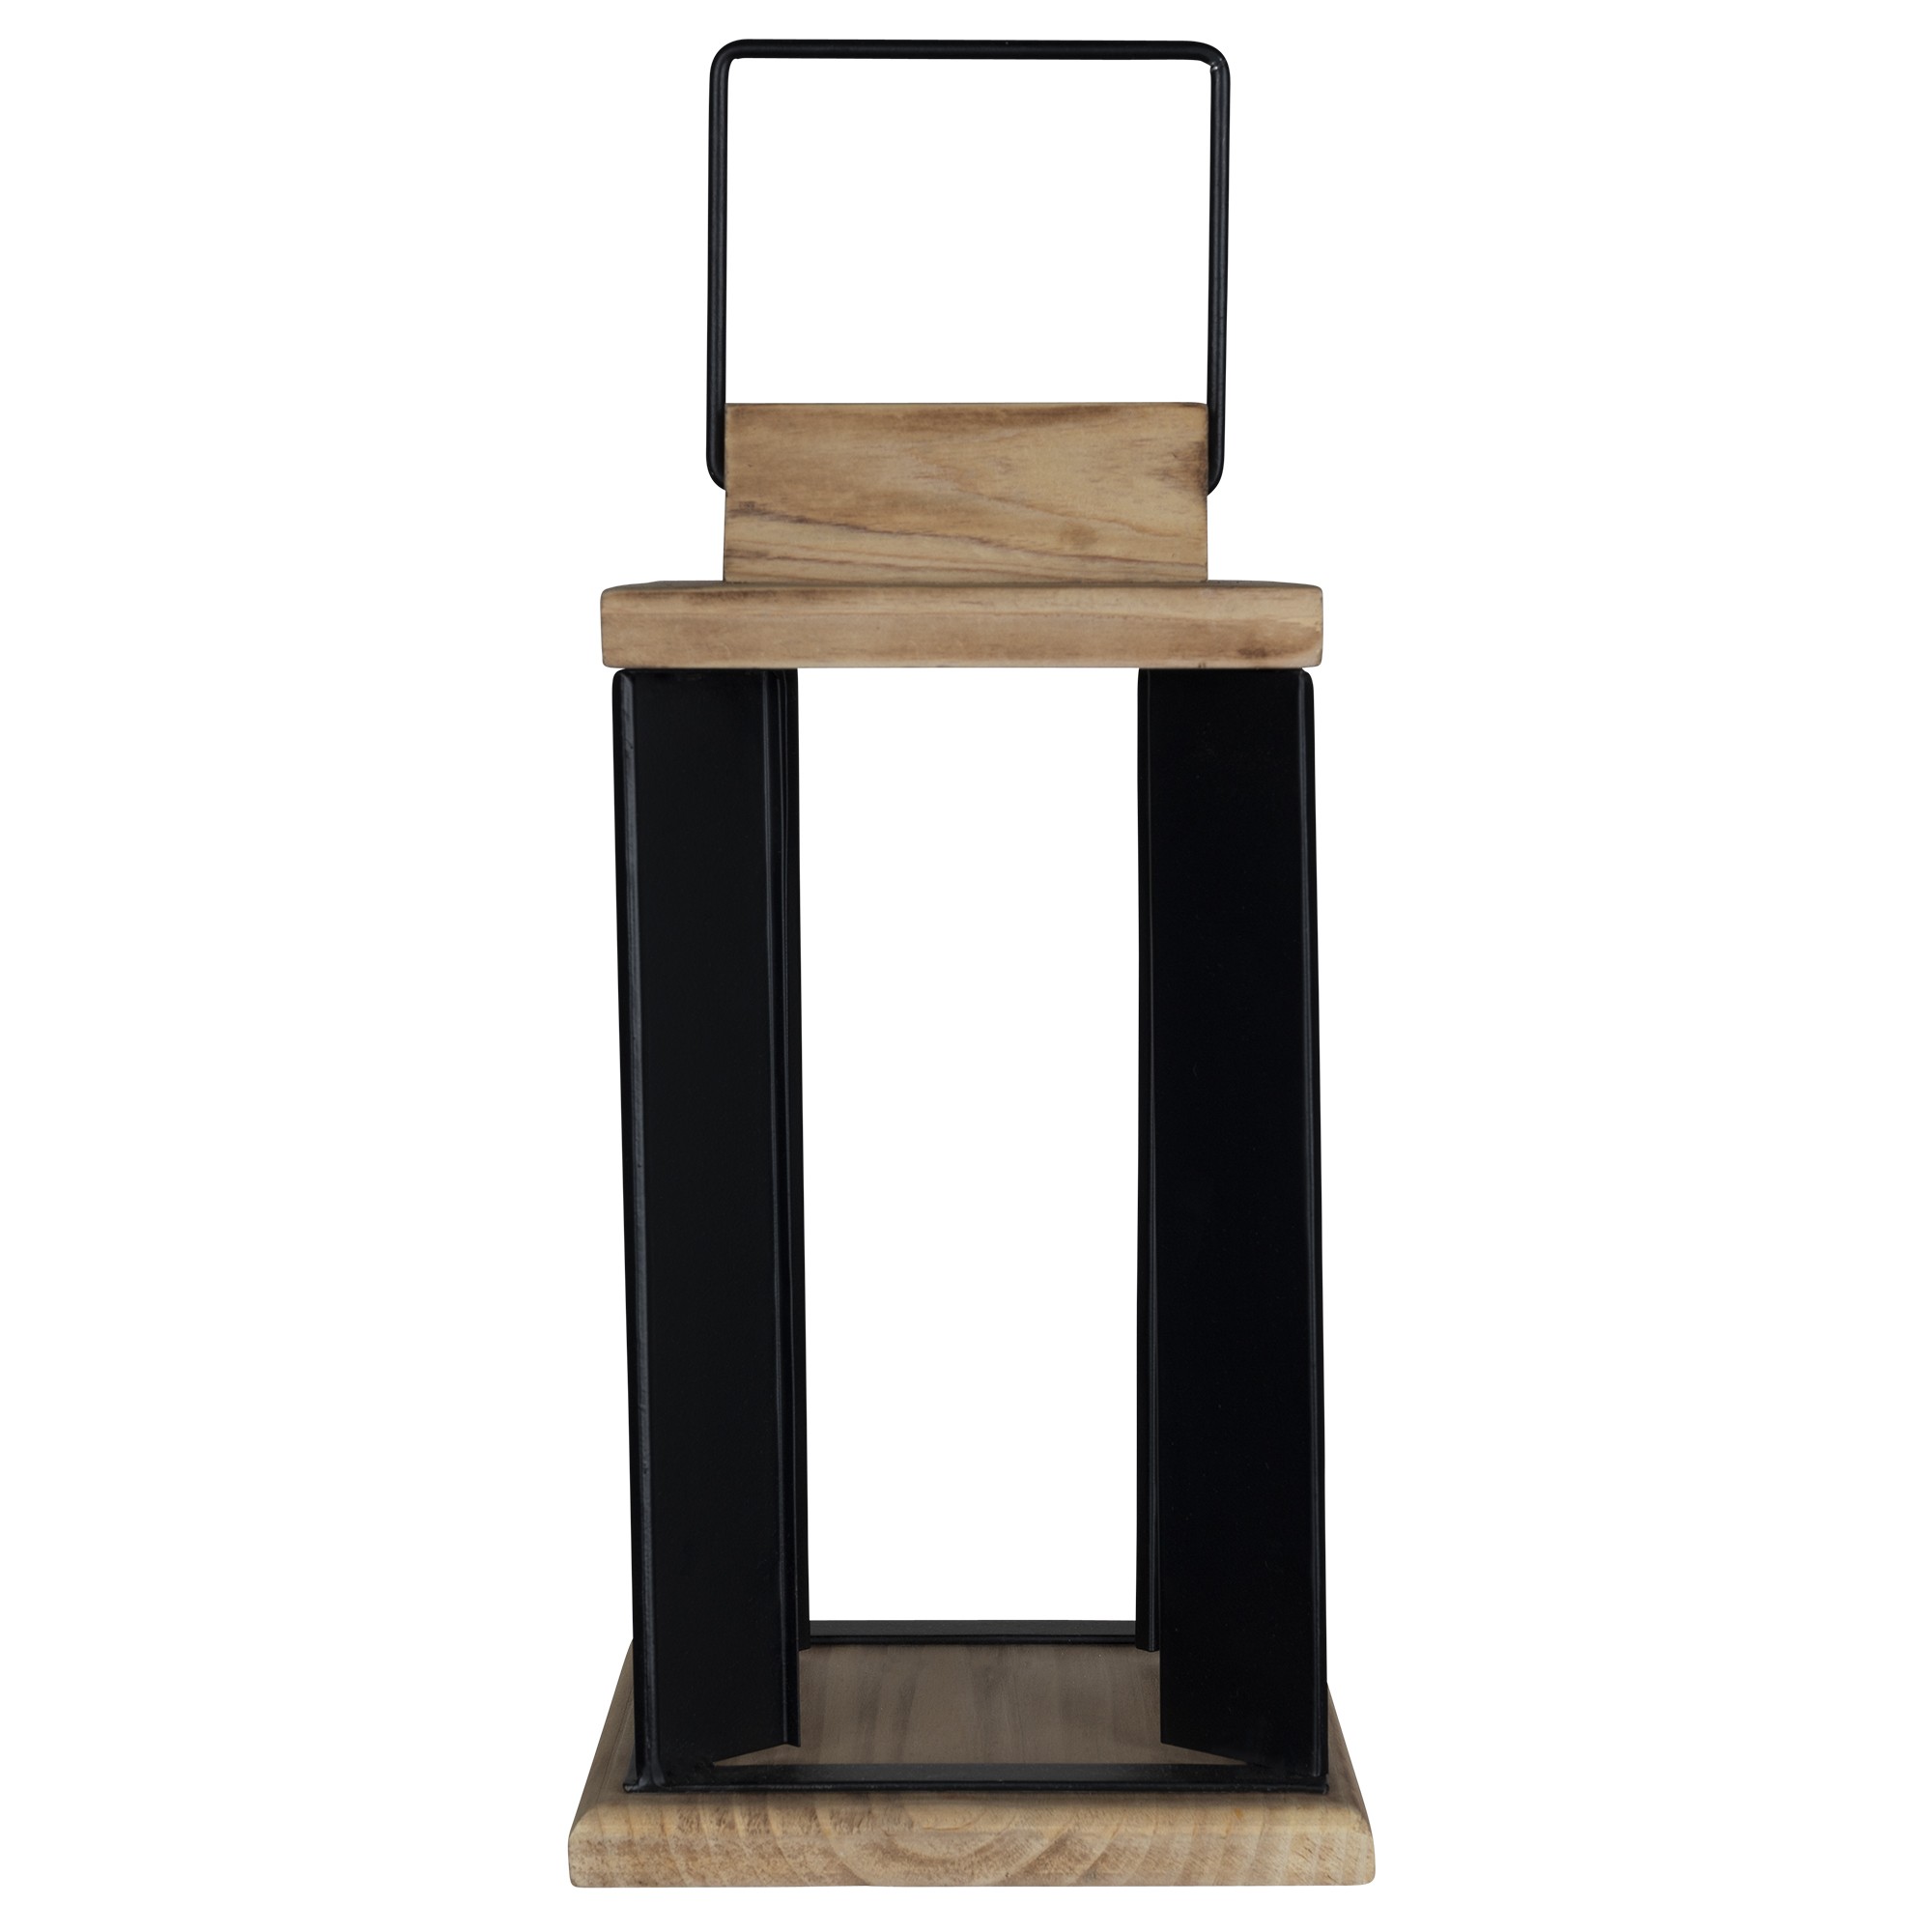 Stratton Home Decor Natural Wood and Black Metal Open Lantern